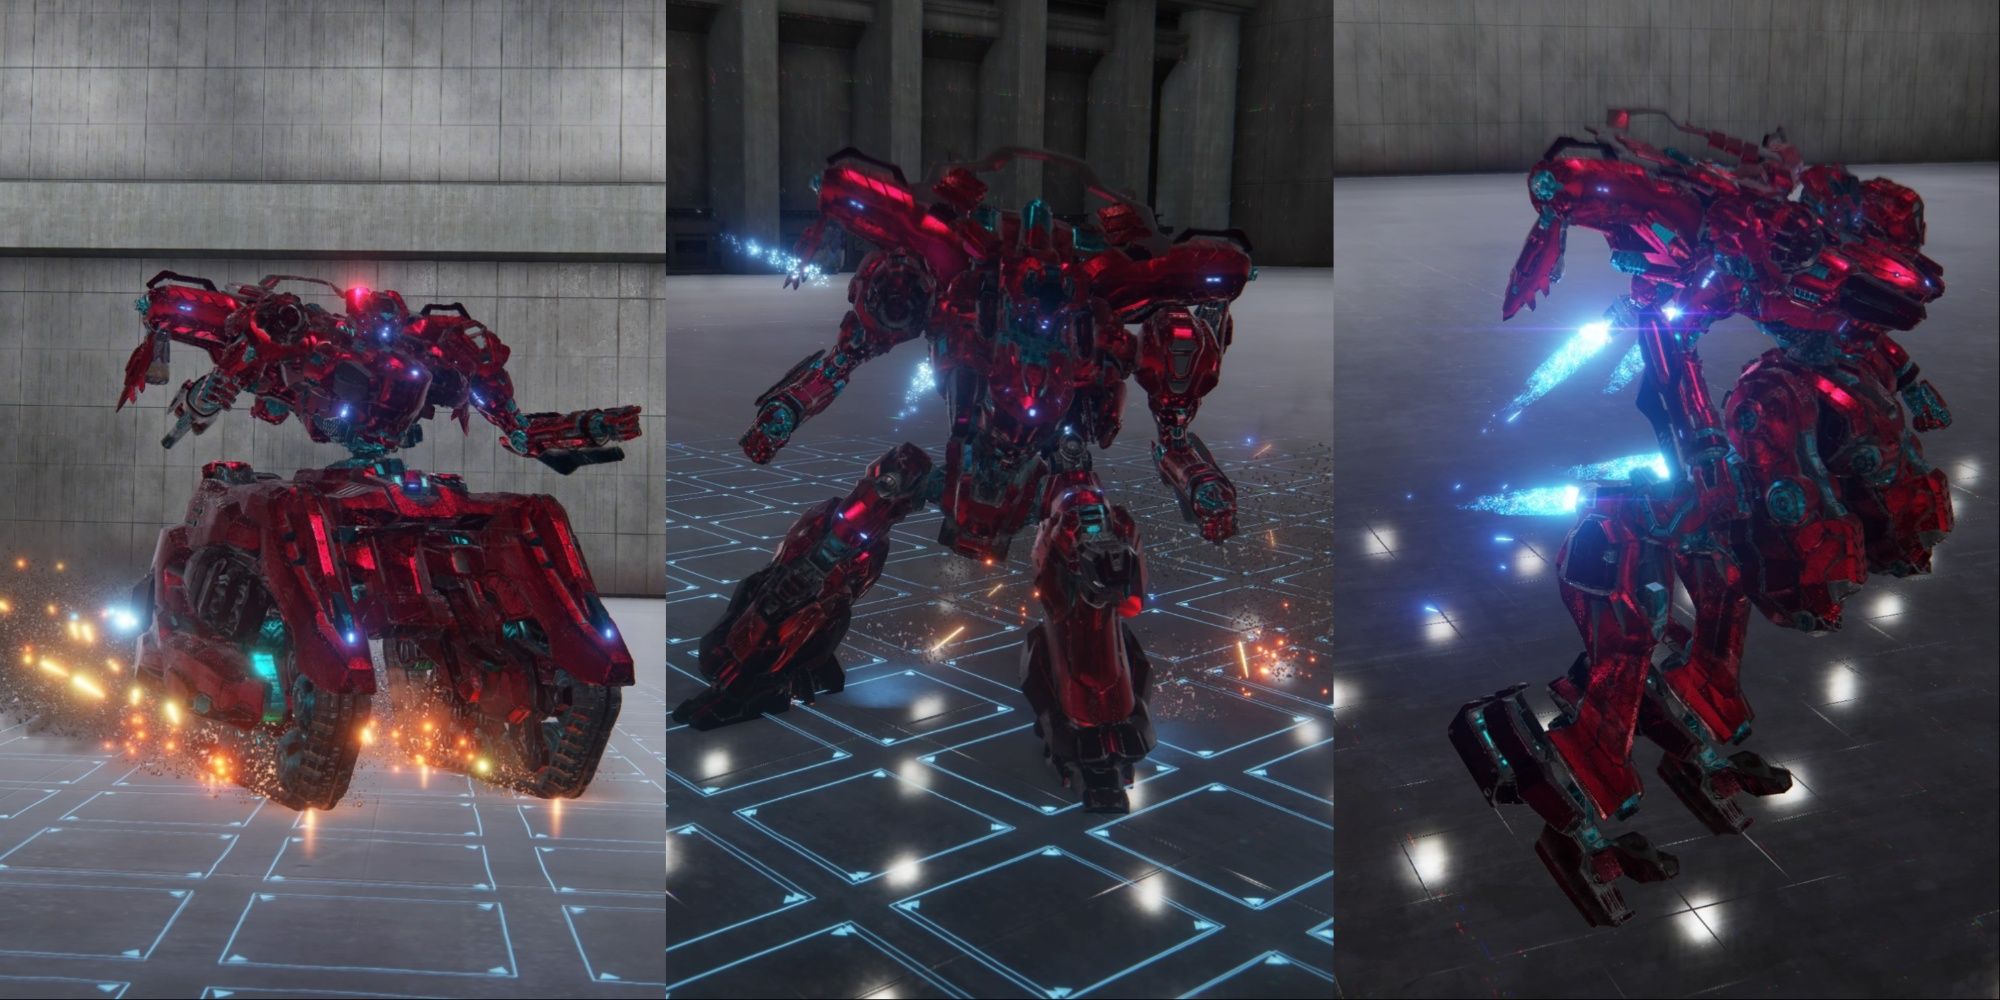 Armored Core 6 collage of leg types featuring an Armored Core with tank legs (left), bipedal legs (Center) and reverse joint legs (right)